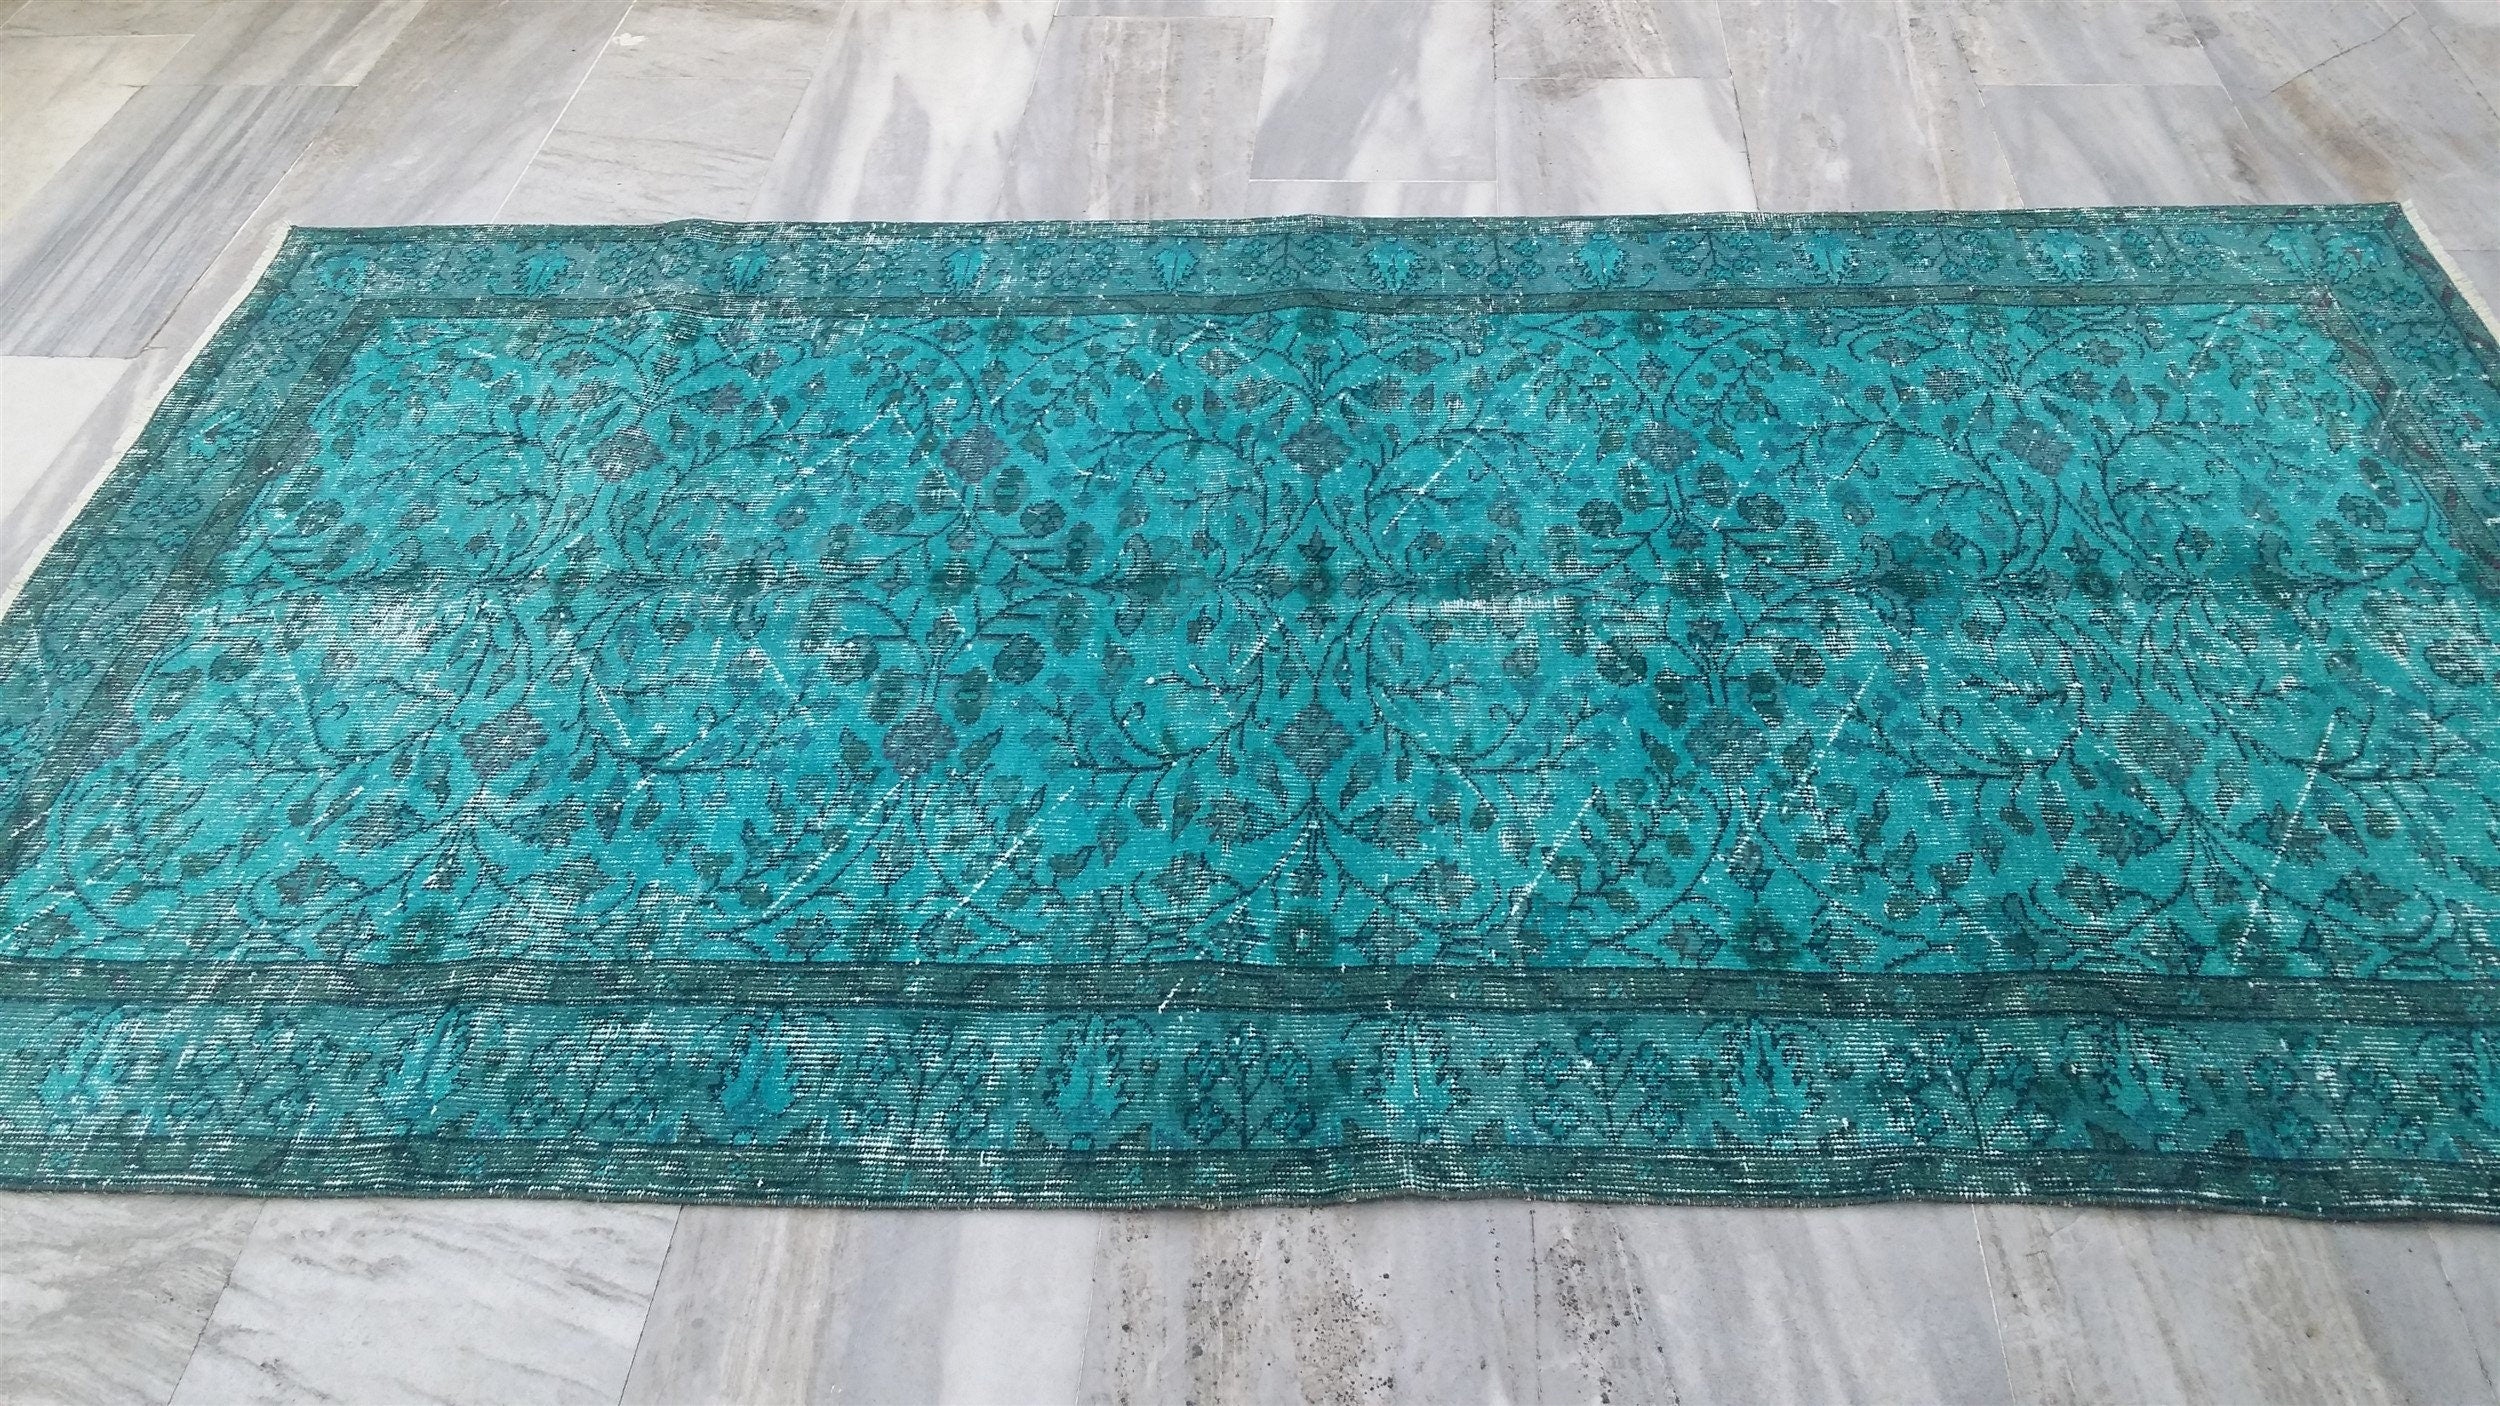 Overdyed Vintage Rug, Turquoise Blue Recycled Rug, Handmade Wool Bohemian Oriental Design Distressed Rug, Persian Area Rug 8'0"x4'6"